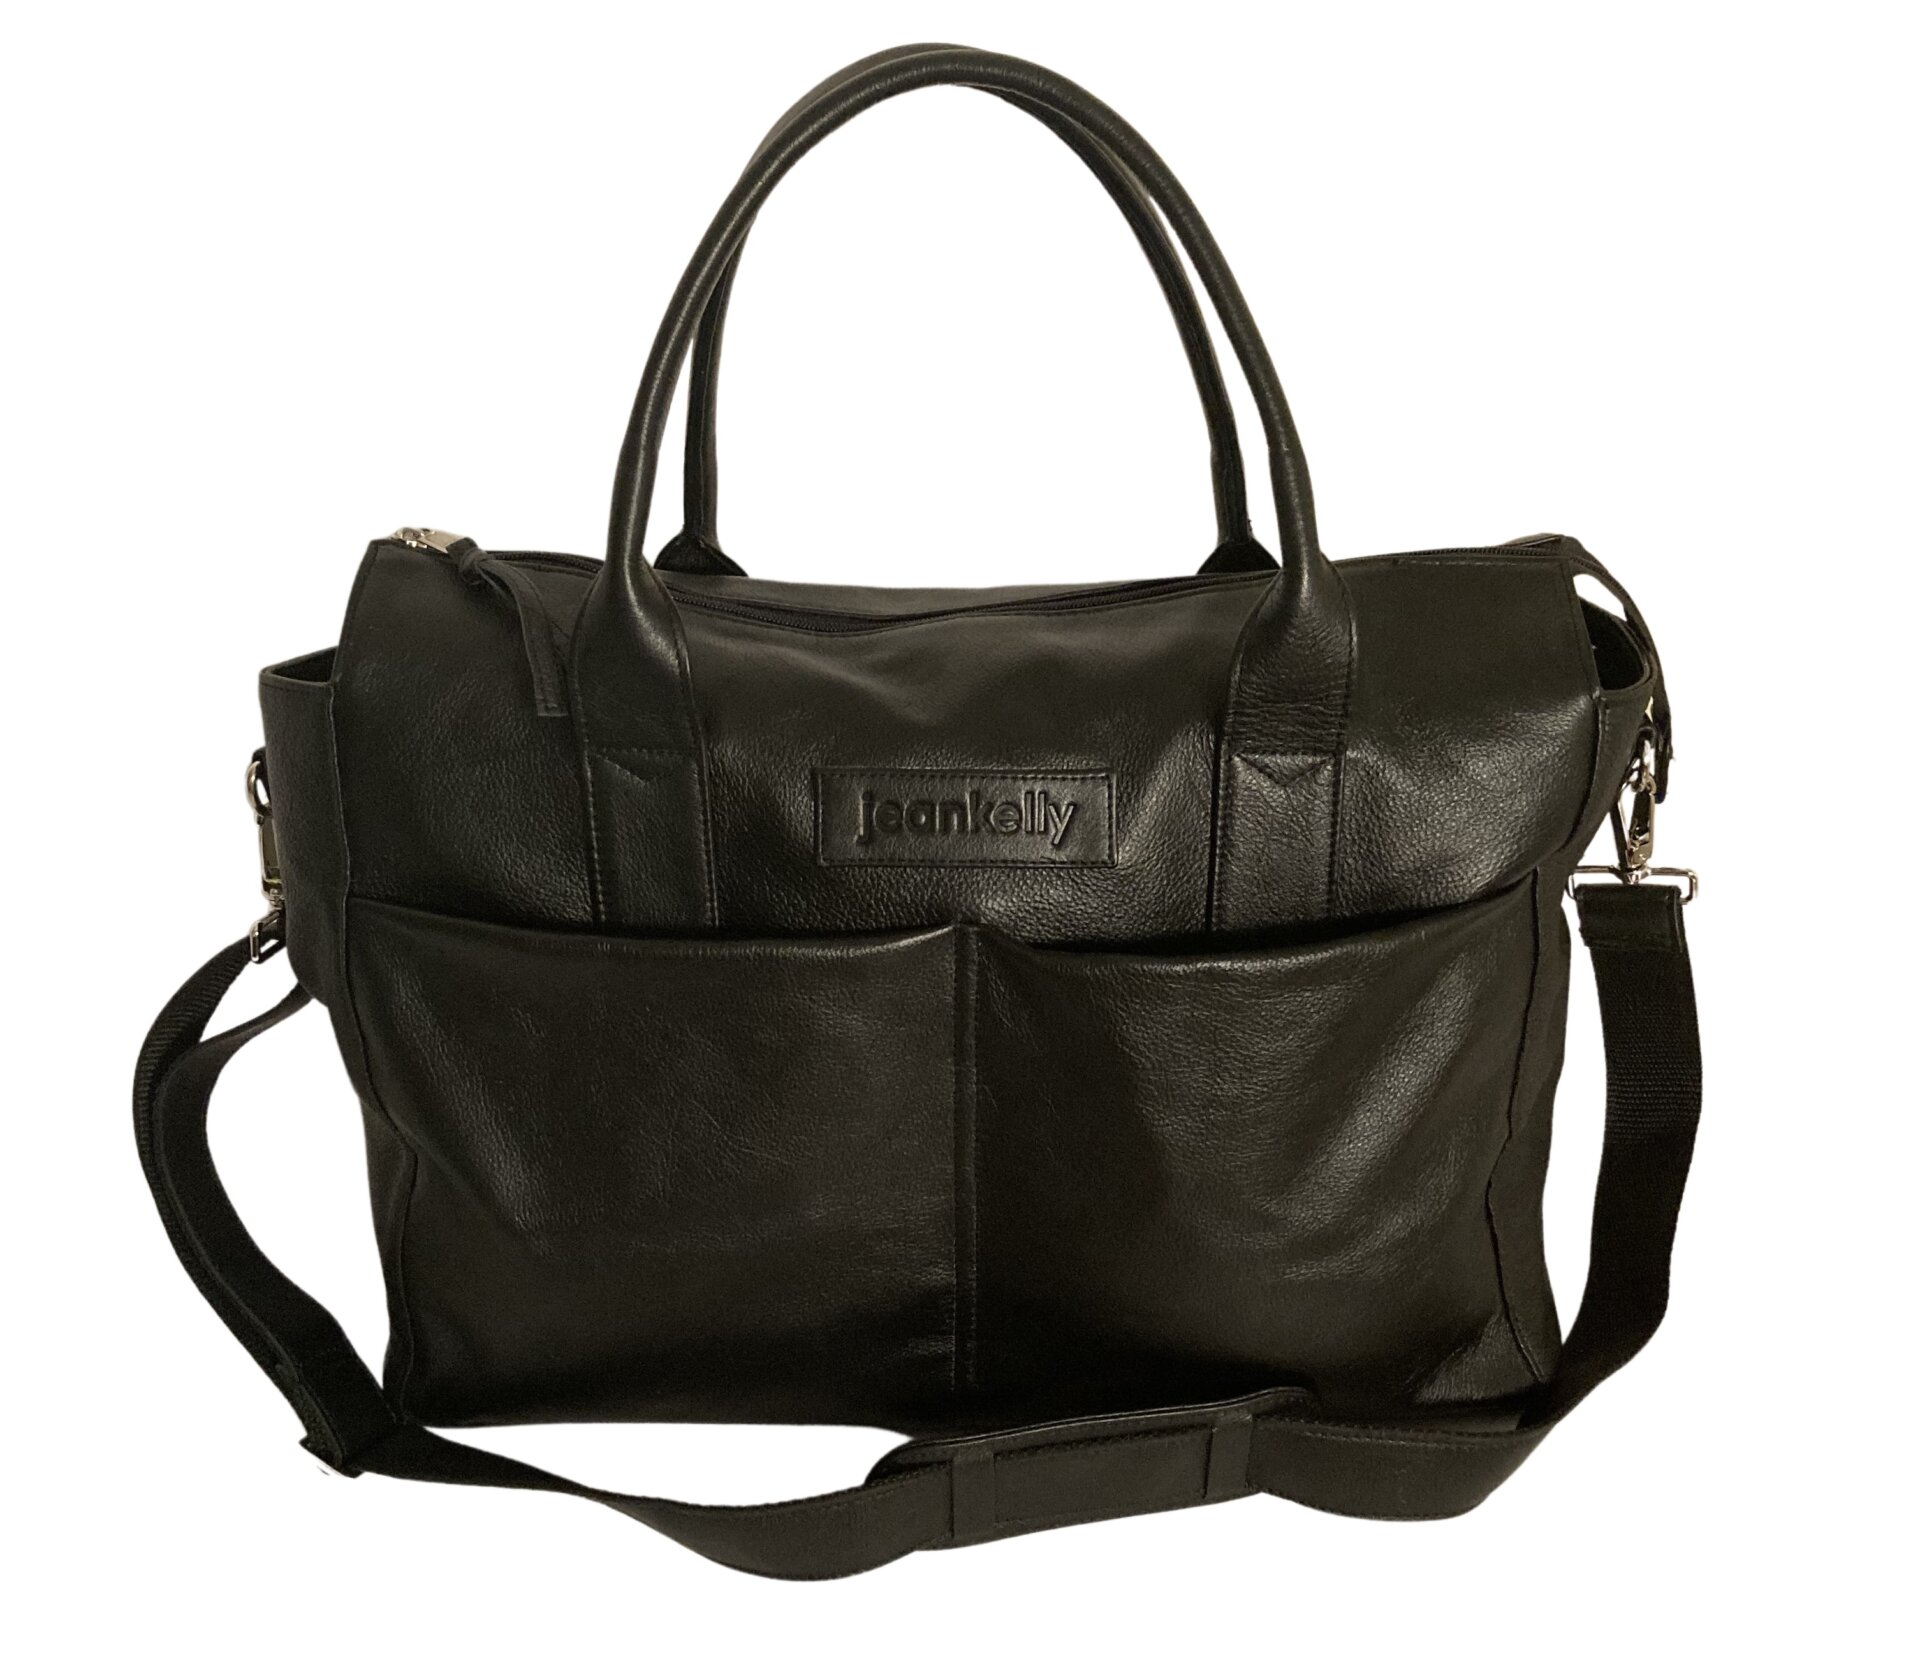 Jeankelly | Contemporary Black Leather Baby Bag